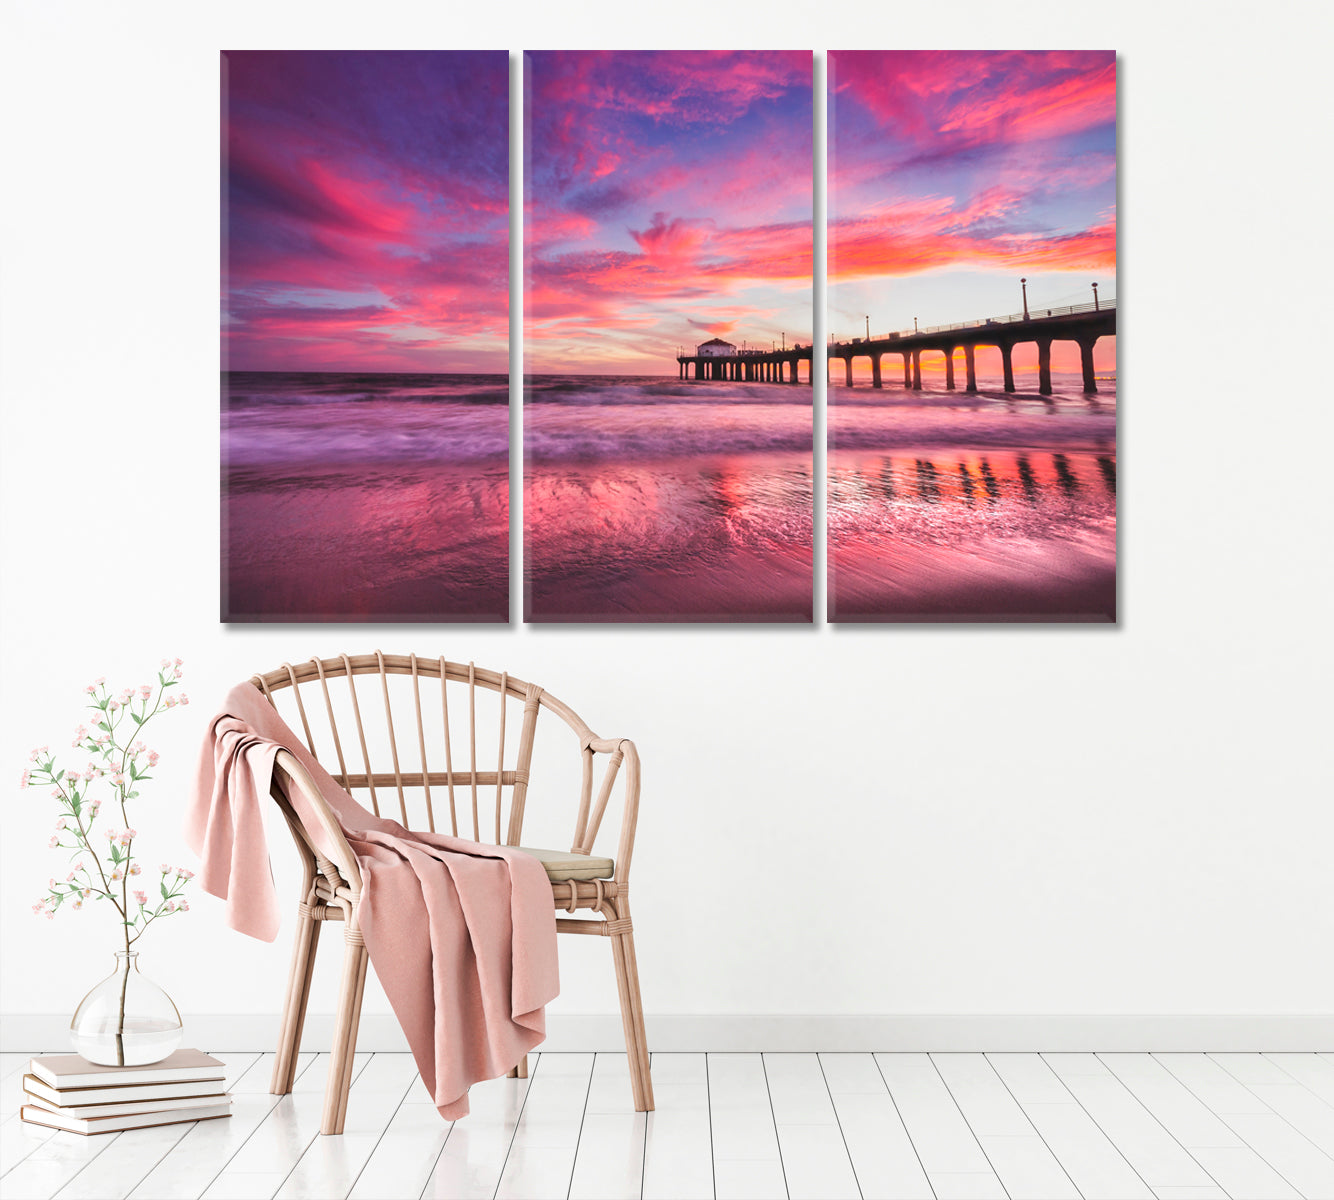 Manhattan Beach Pier with Colorful Sunset Canvas Print ArtLexy 3 Panels 36"x24" inches 